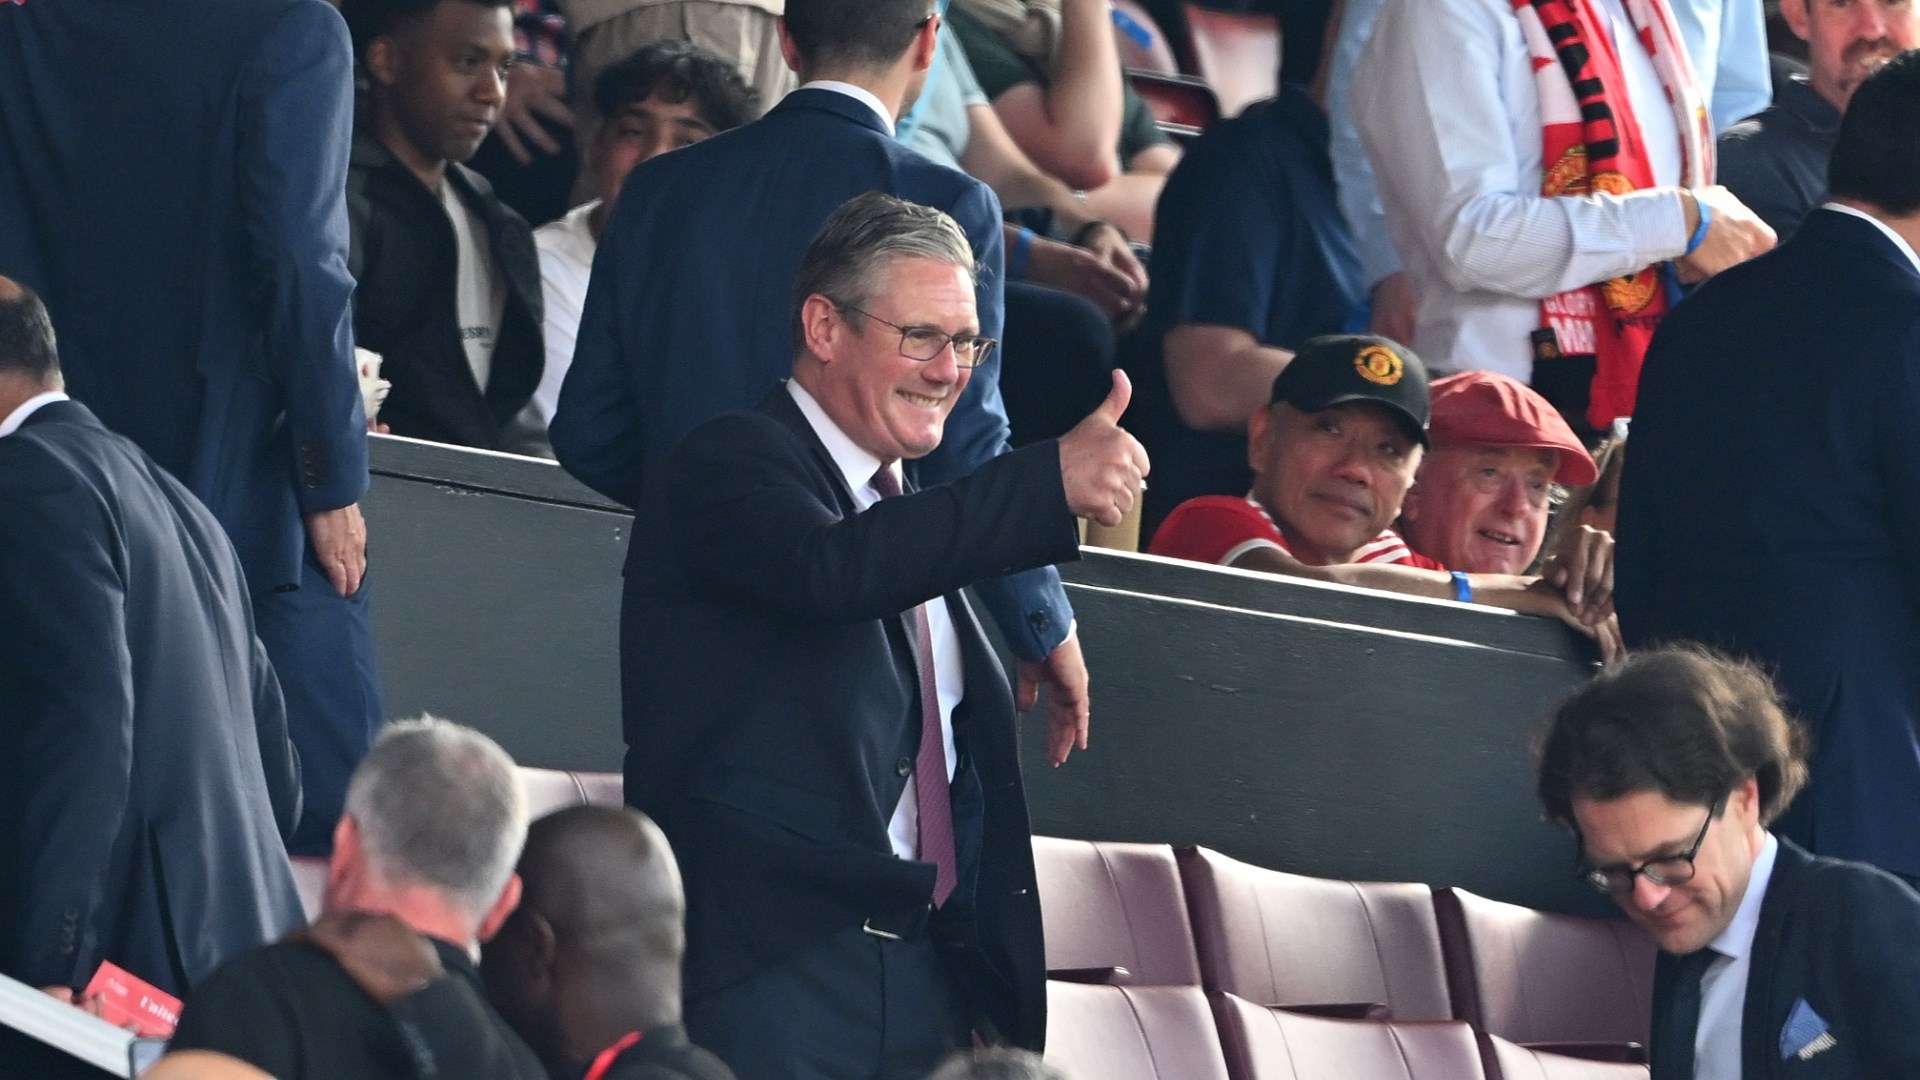 Labour leader Keir Starmer spotted at Old Trafford